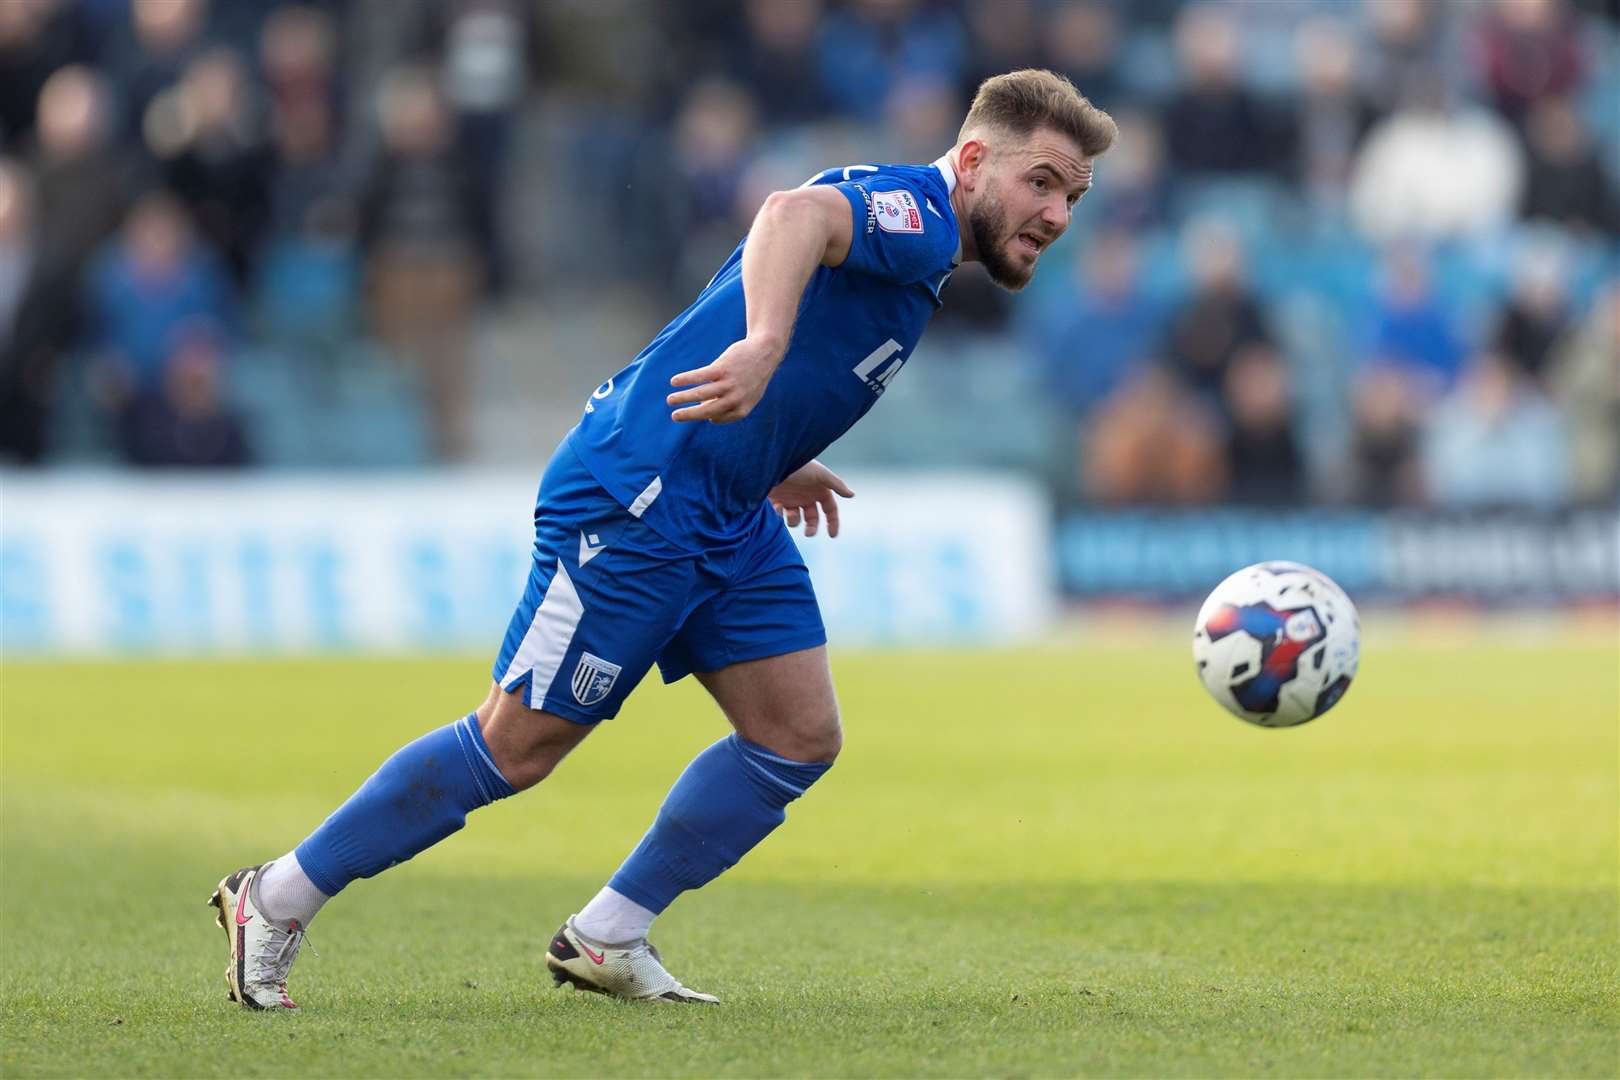 Alex MacDonald is in discussions over a new contract with Gillingham